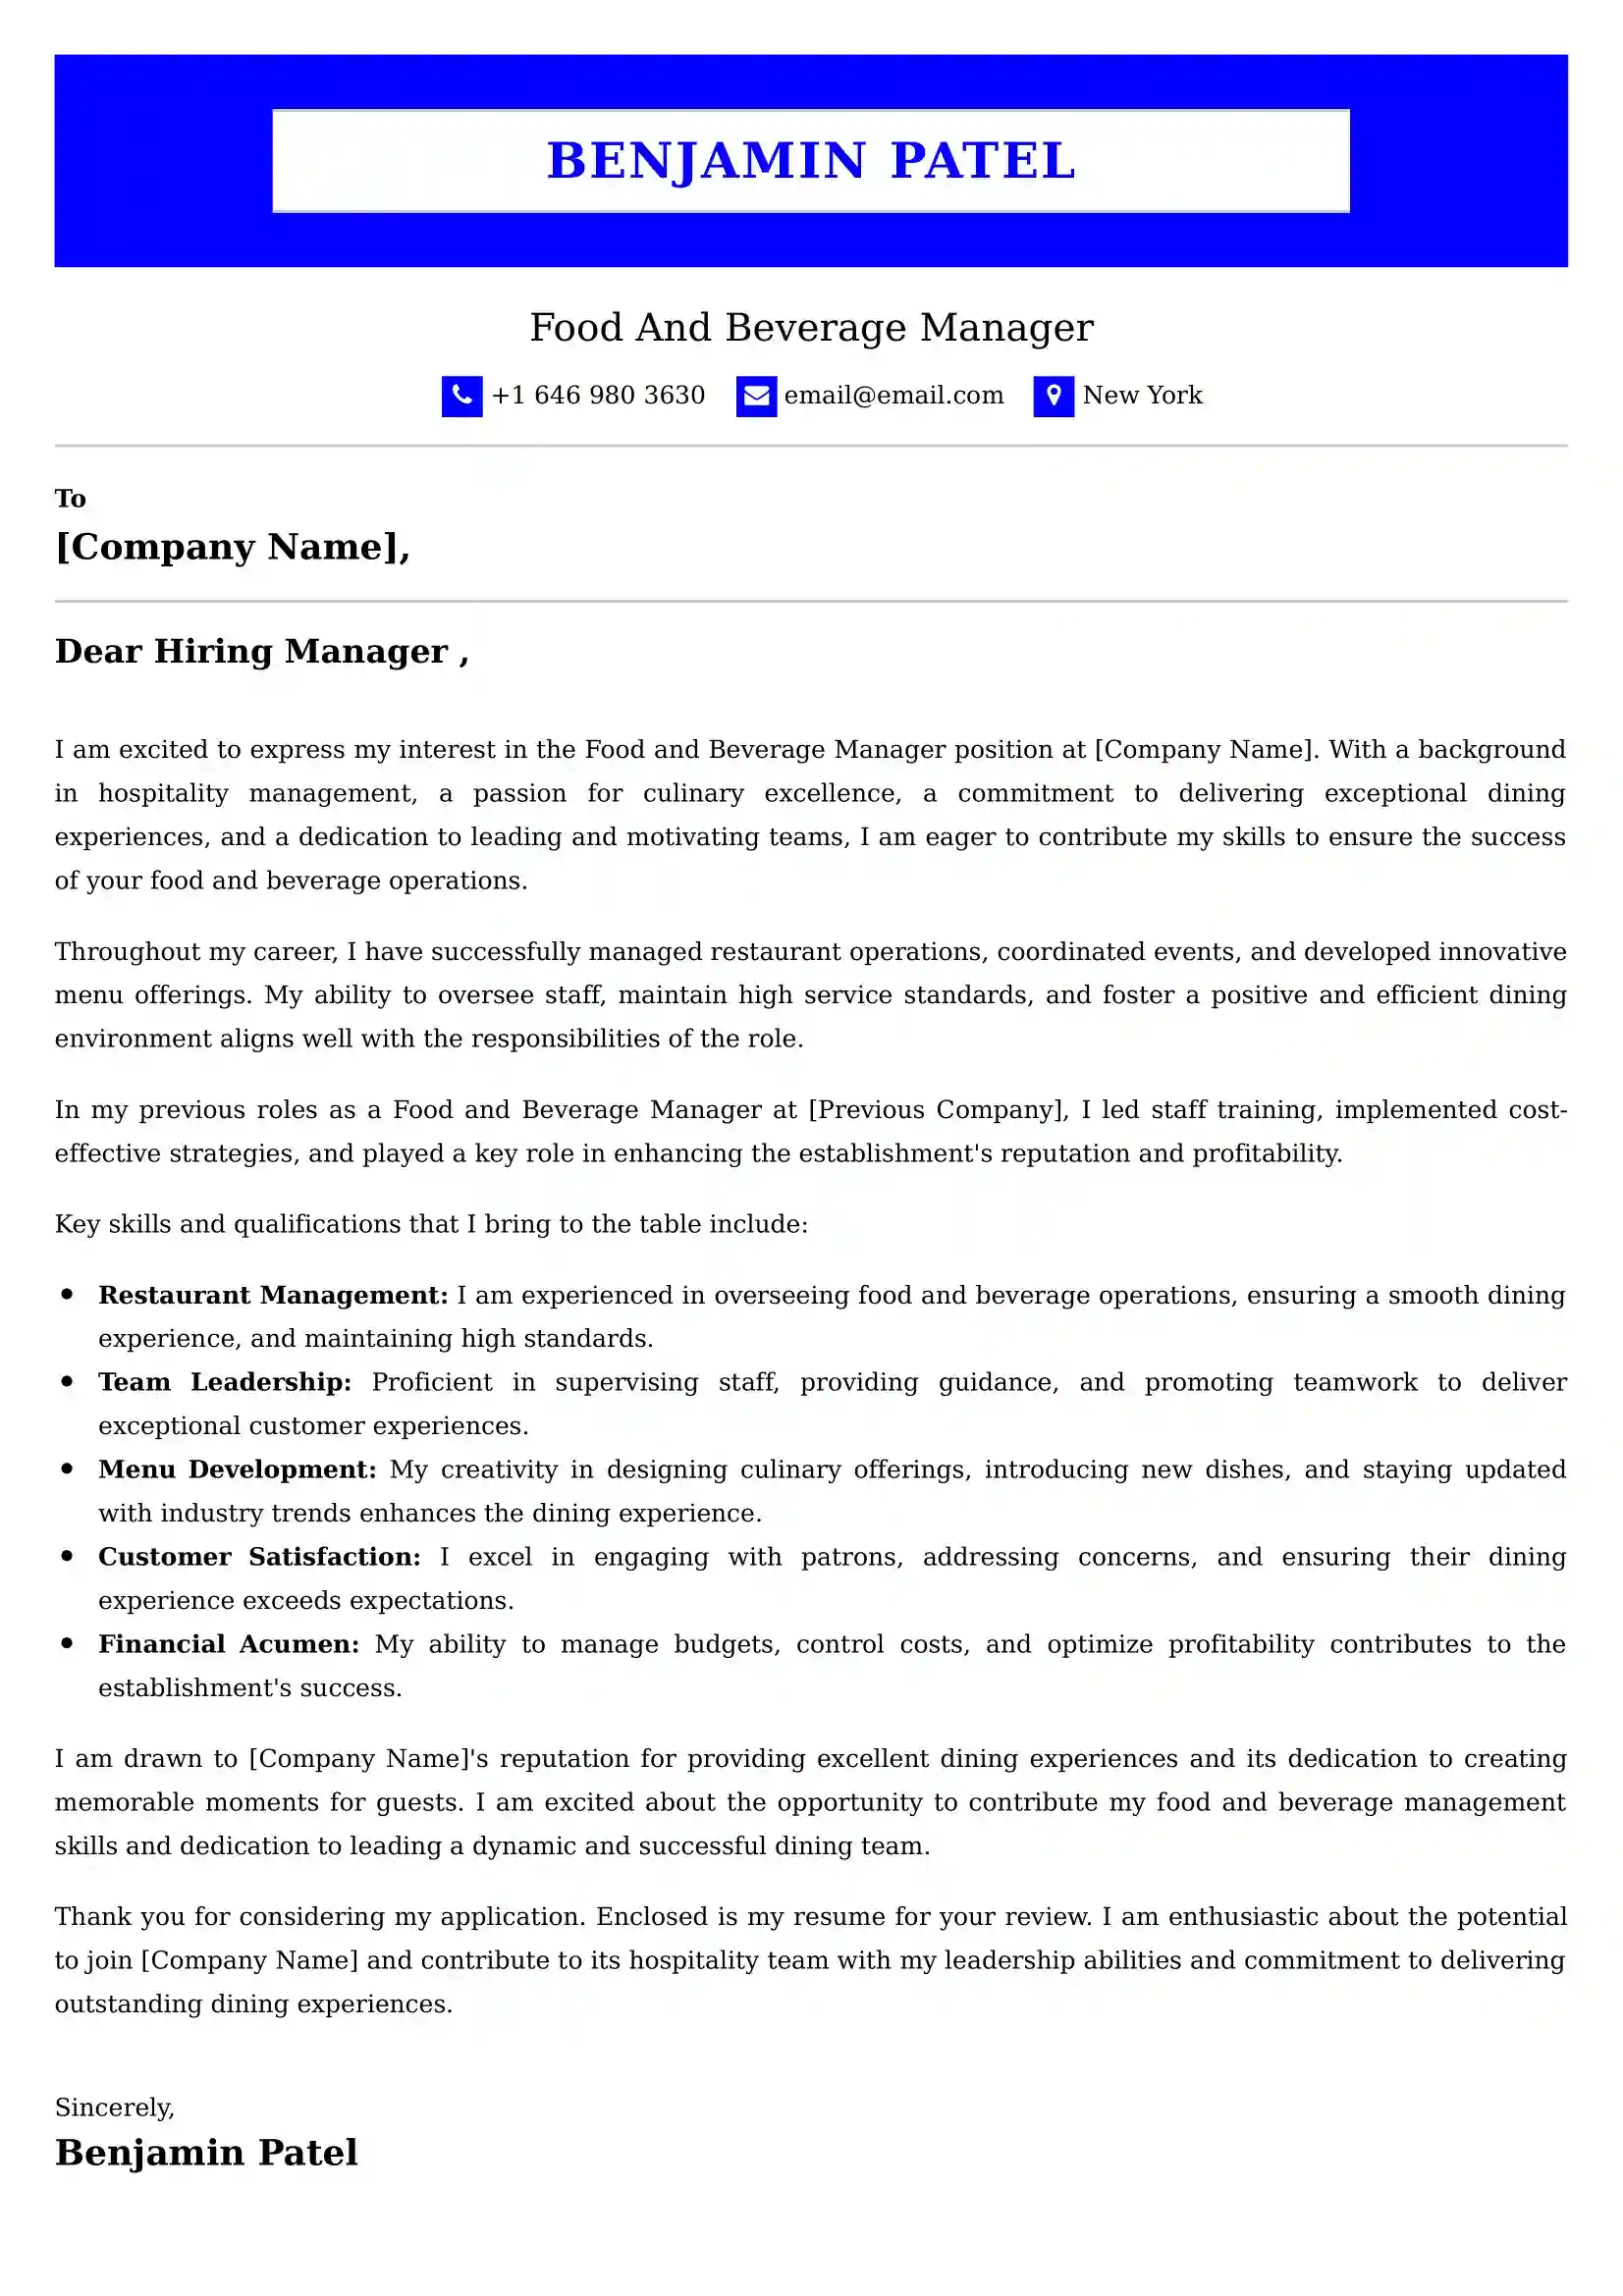 Food And Beverage Manager Cover Letter Examples UAE - ATS Format